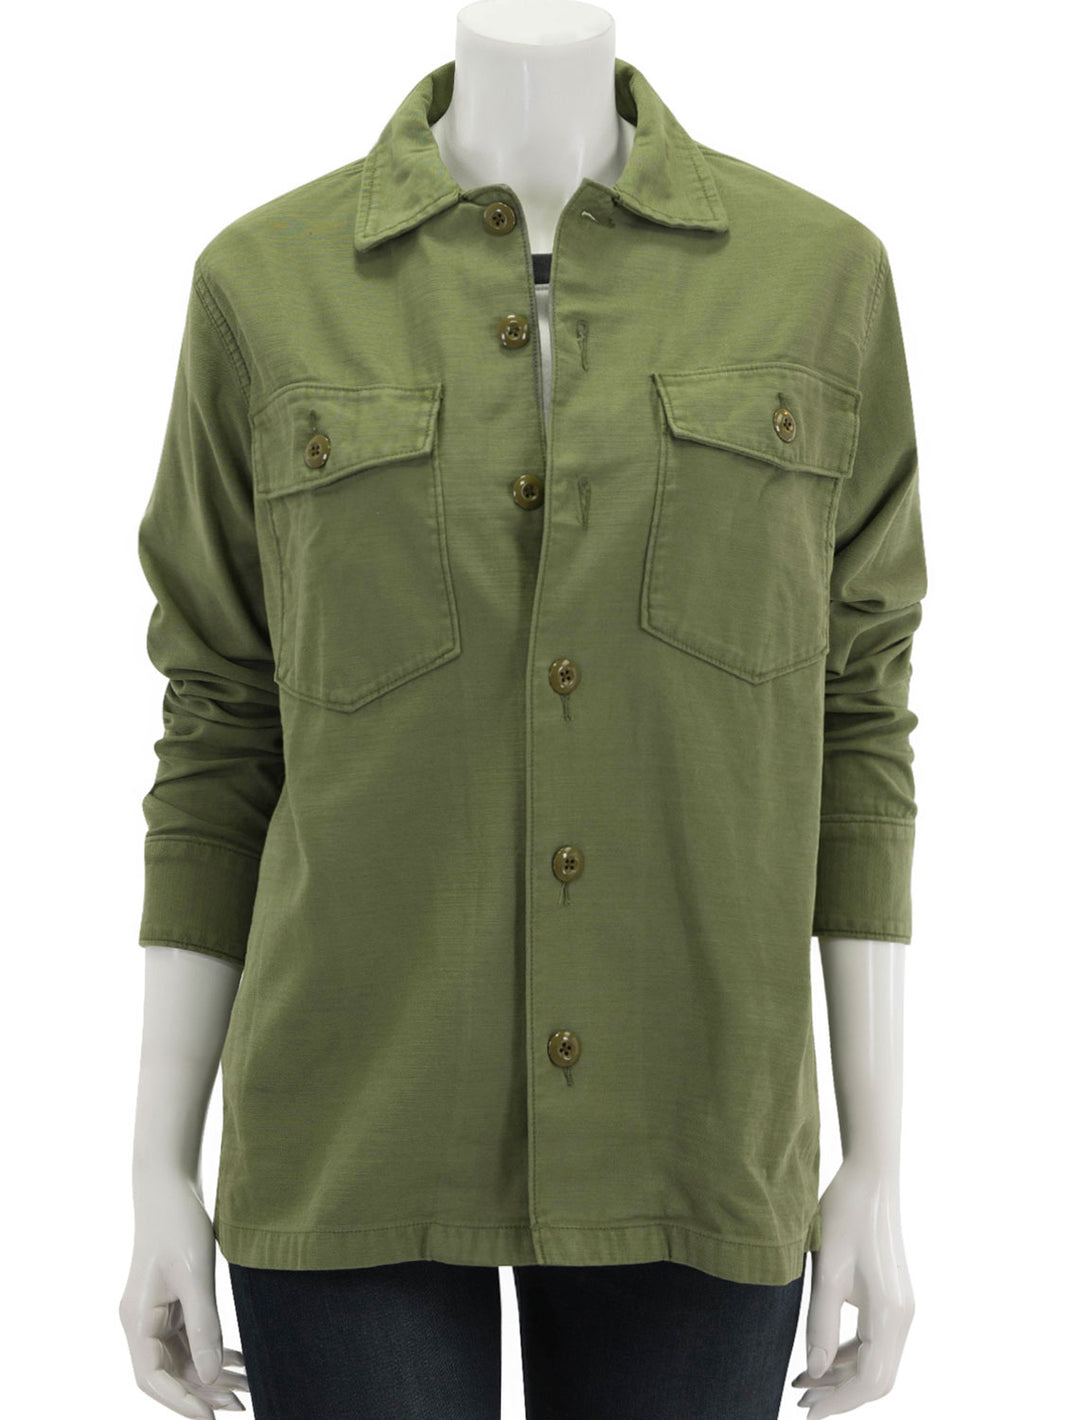 Front view of Faherty's savannah cotton overshirt in fatigue, buttoned.